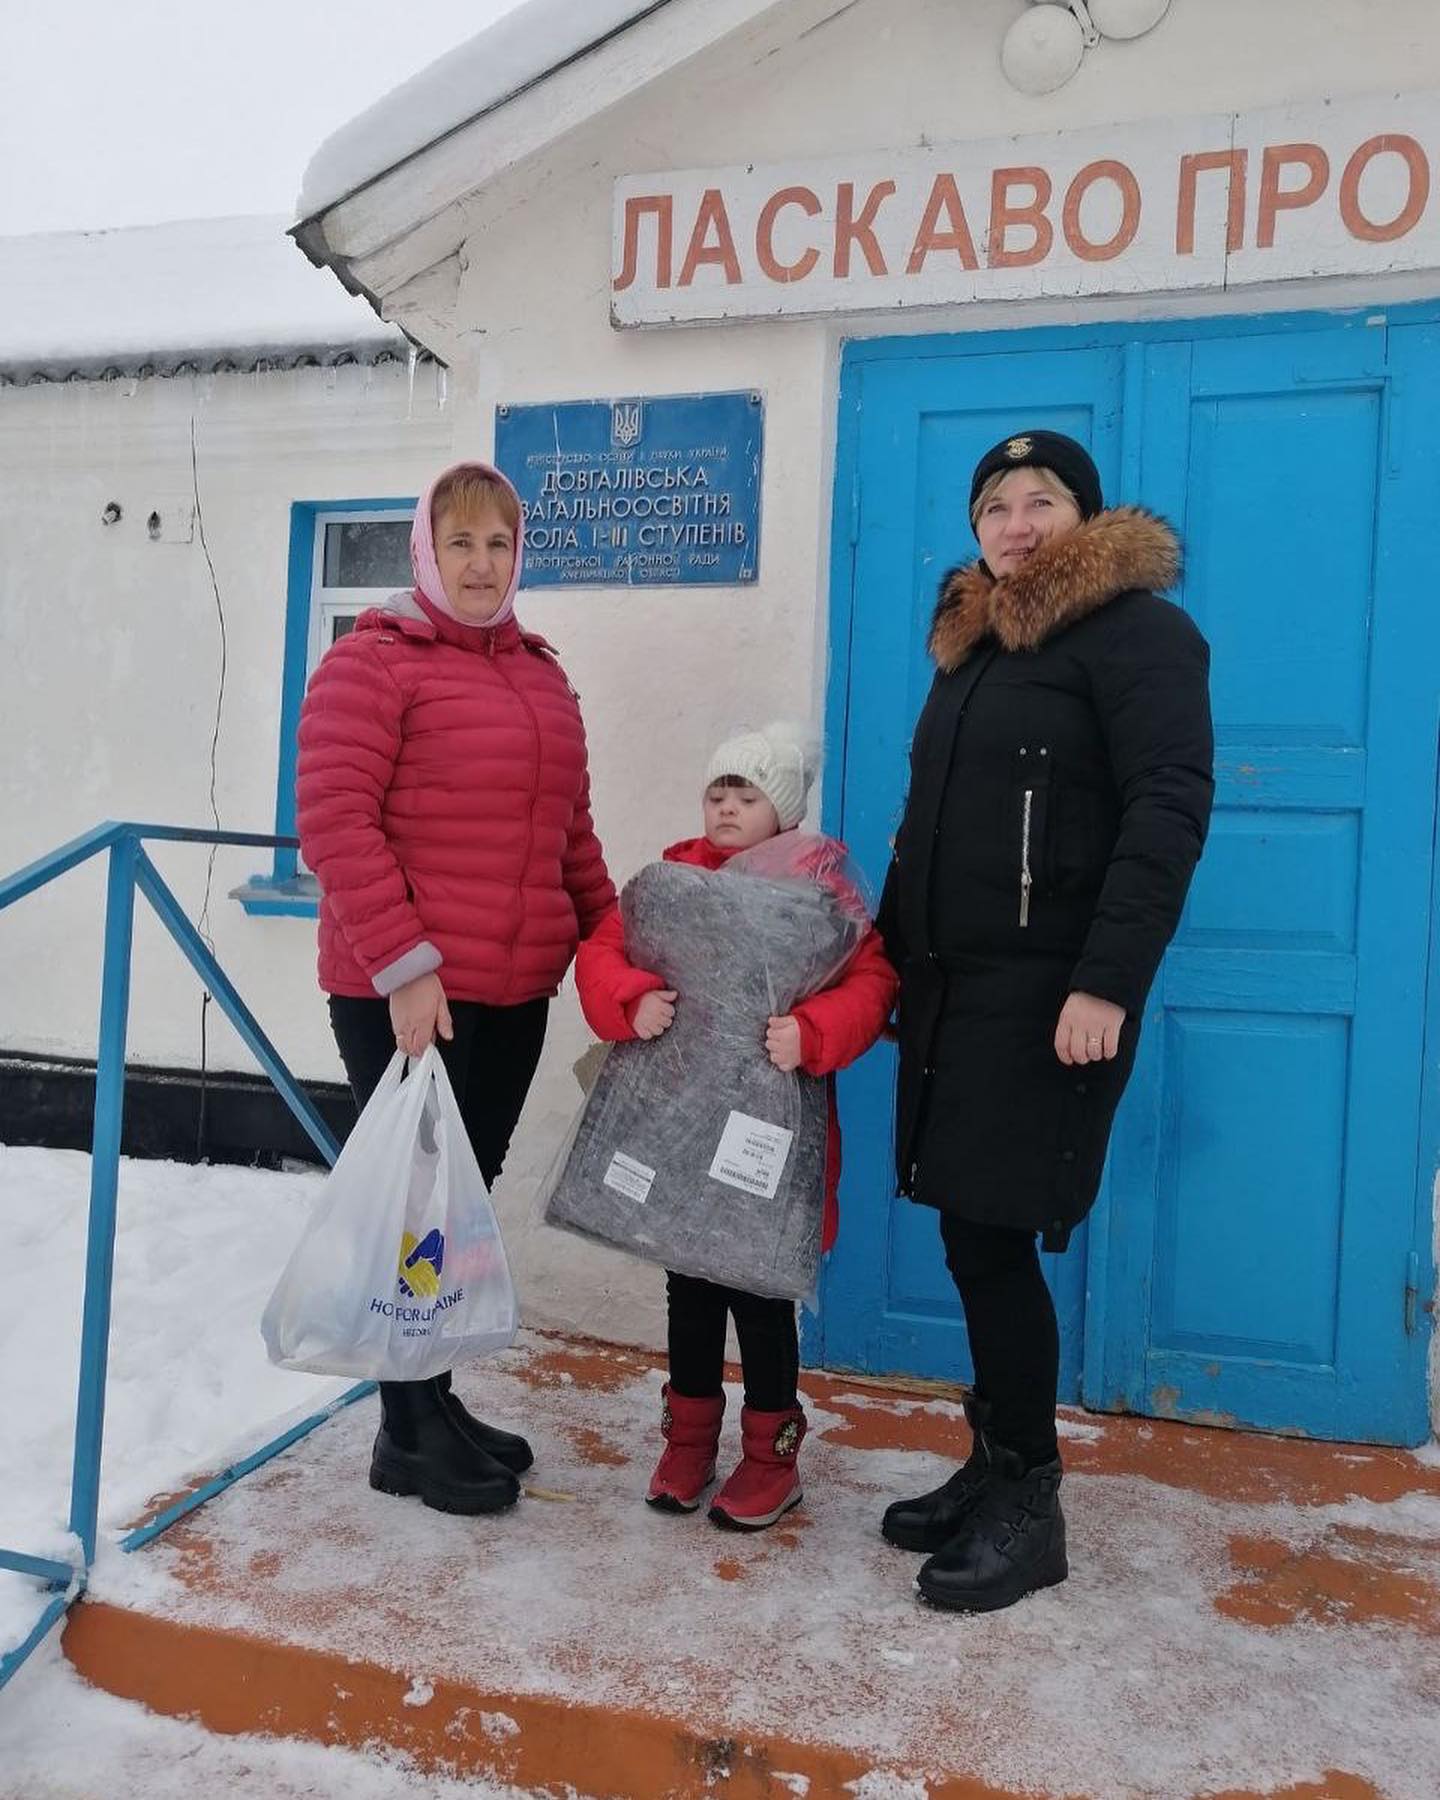 Three women and a child standing in front of a building.